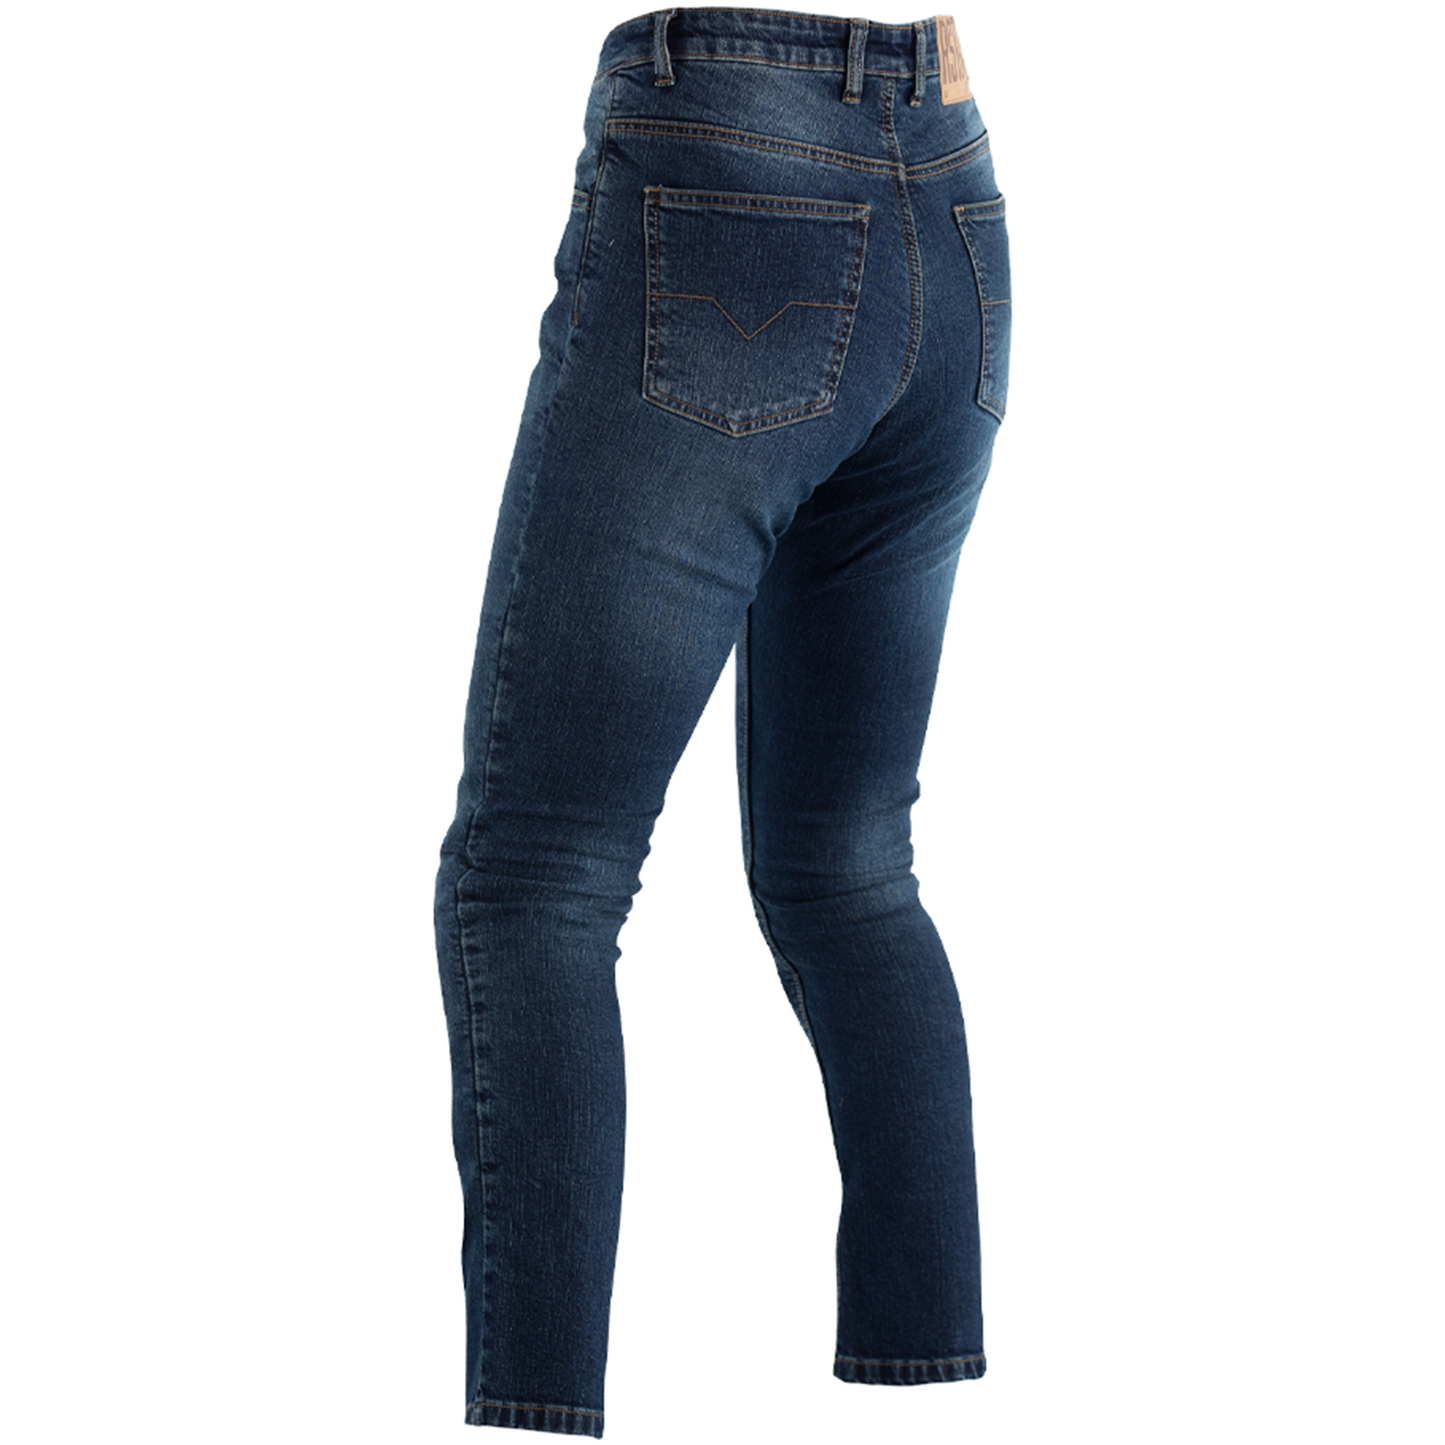 RST Tapered-Fit Reinforced CE Ladies Textile Jeans - Mid Blue Denim